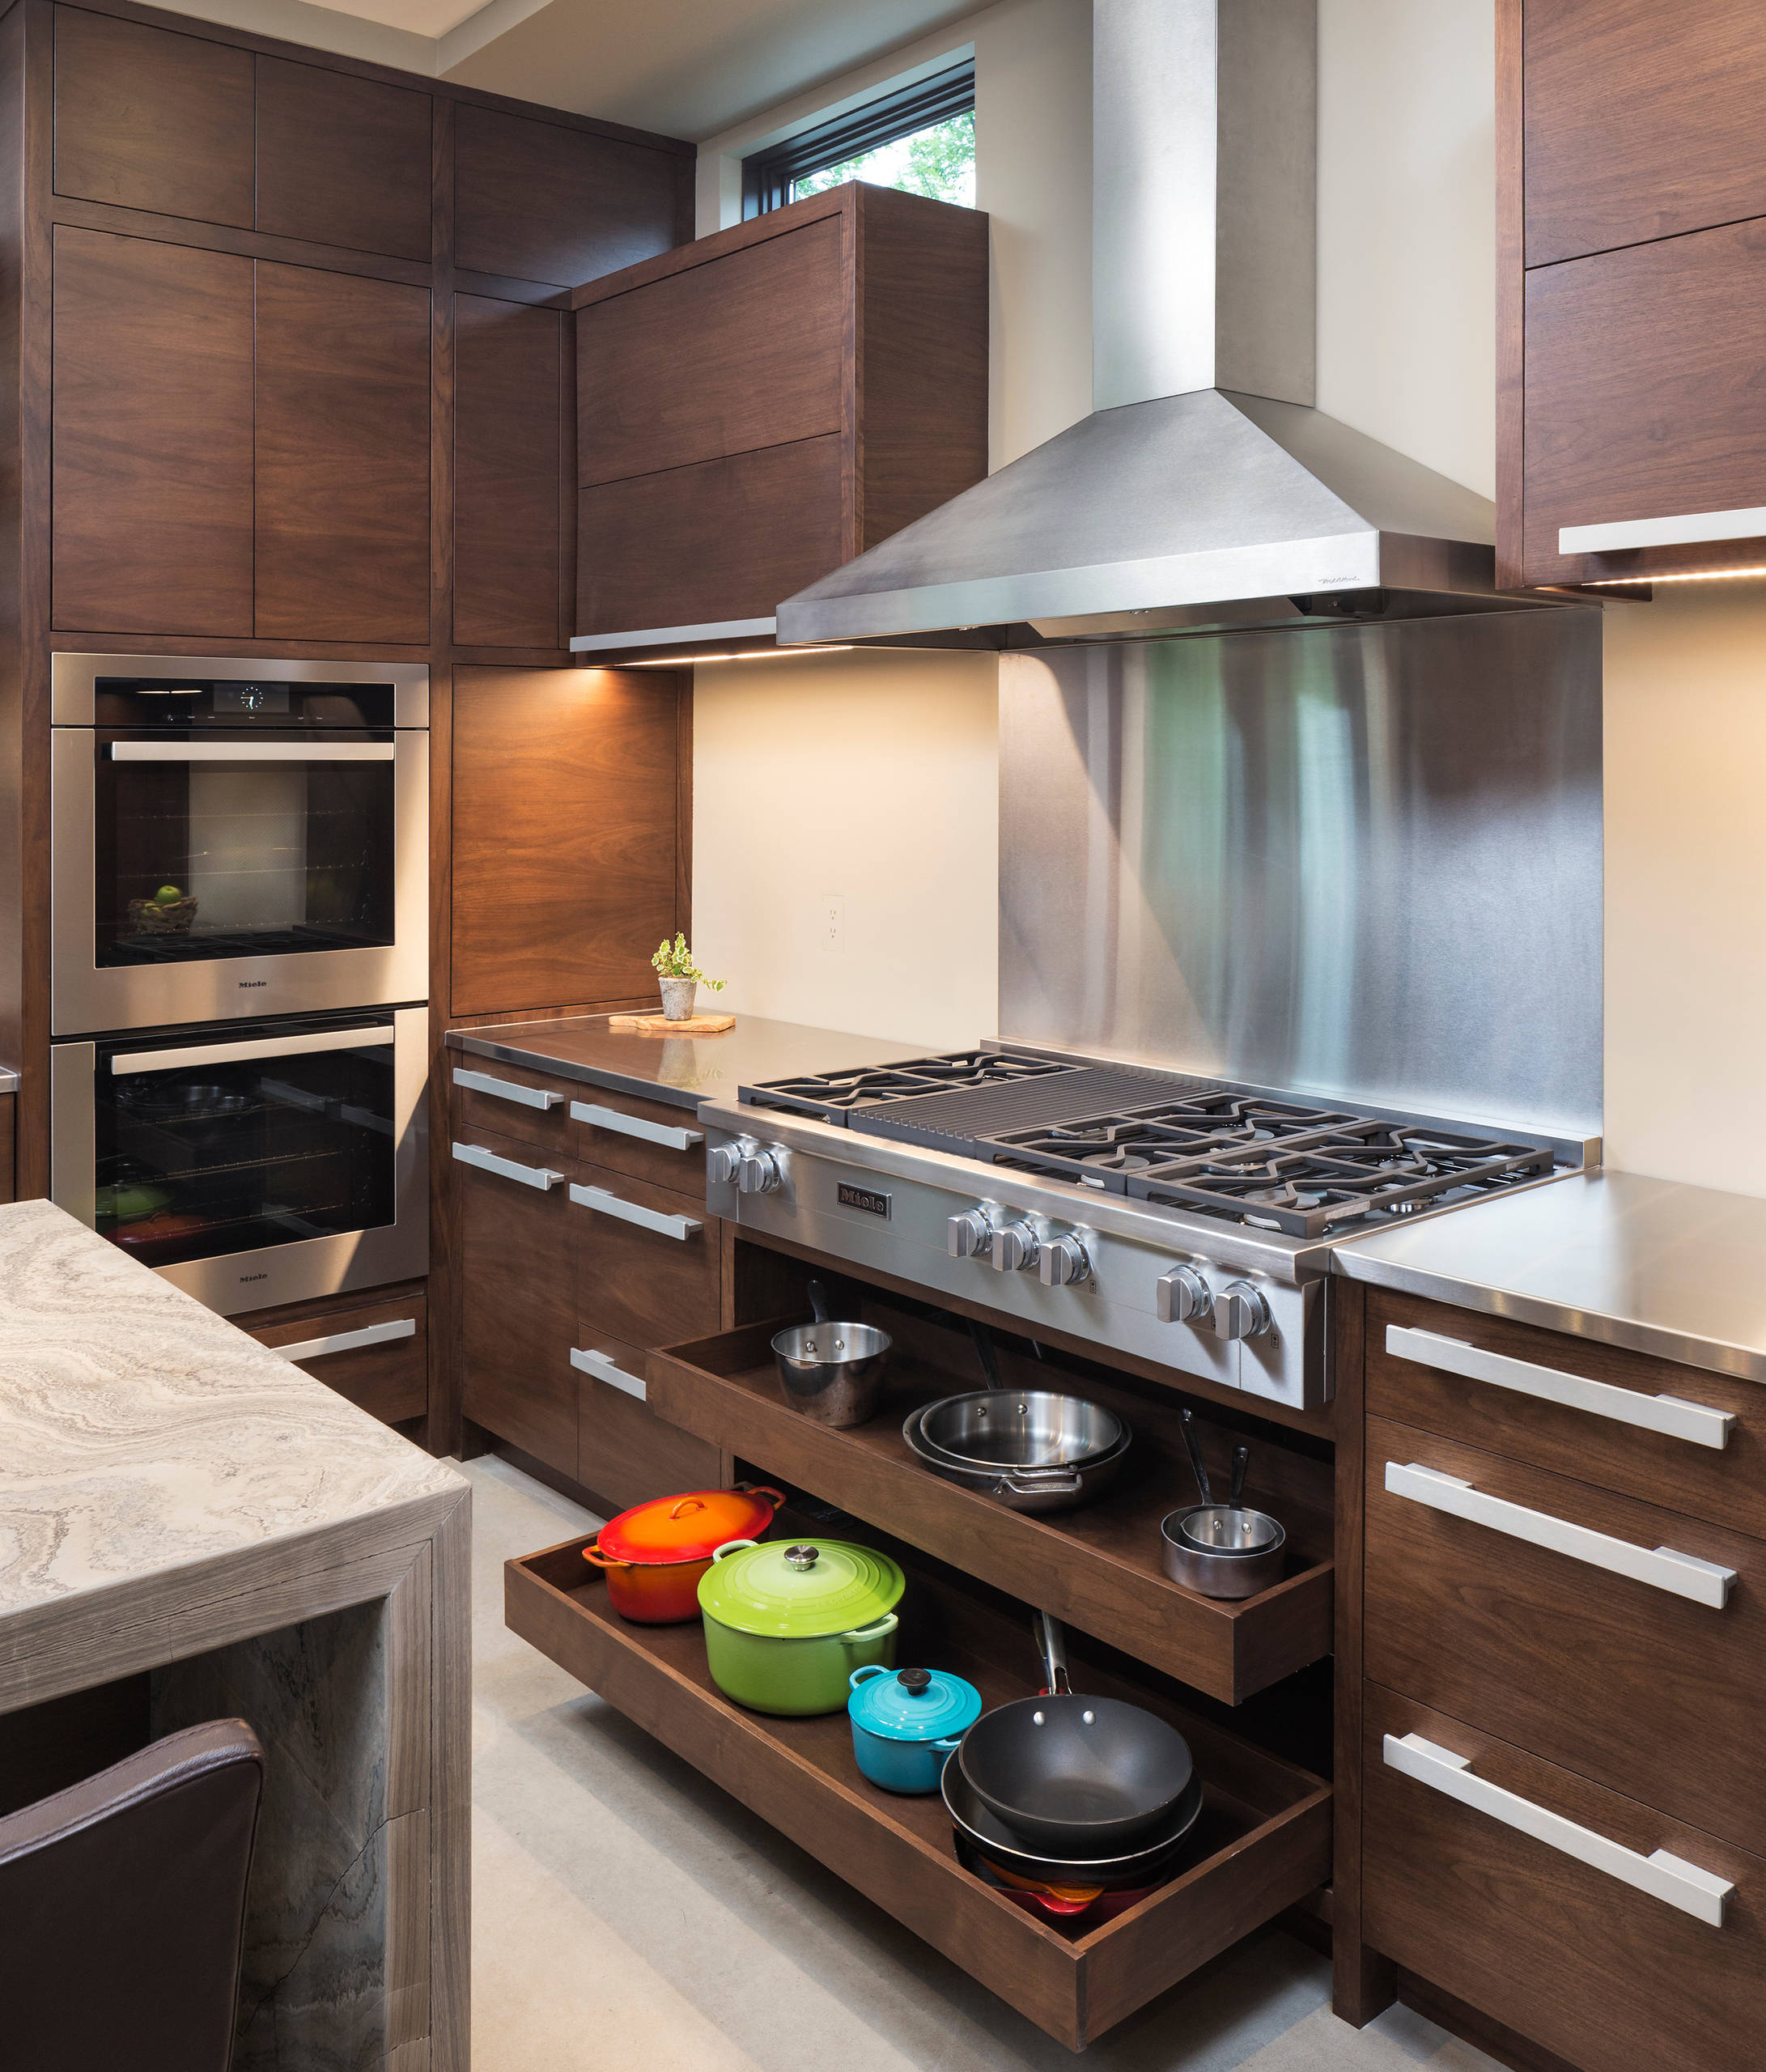 18 Small Kitchen Ideas You'll Love   October, 18   Houzz